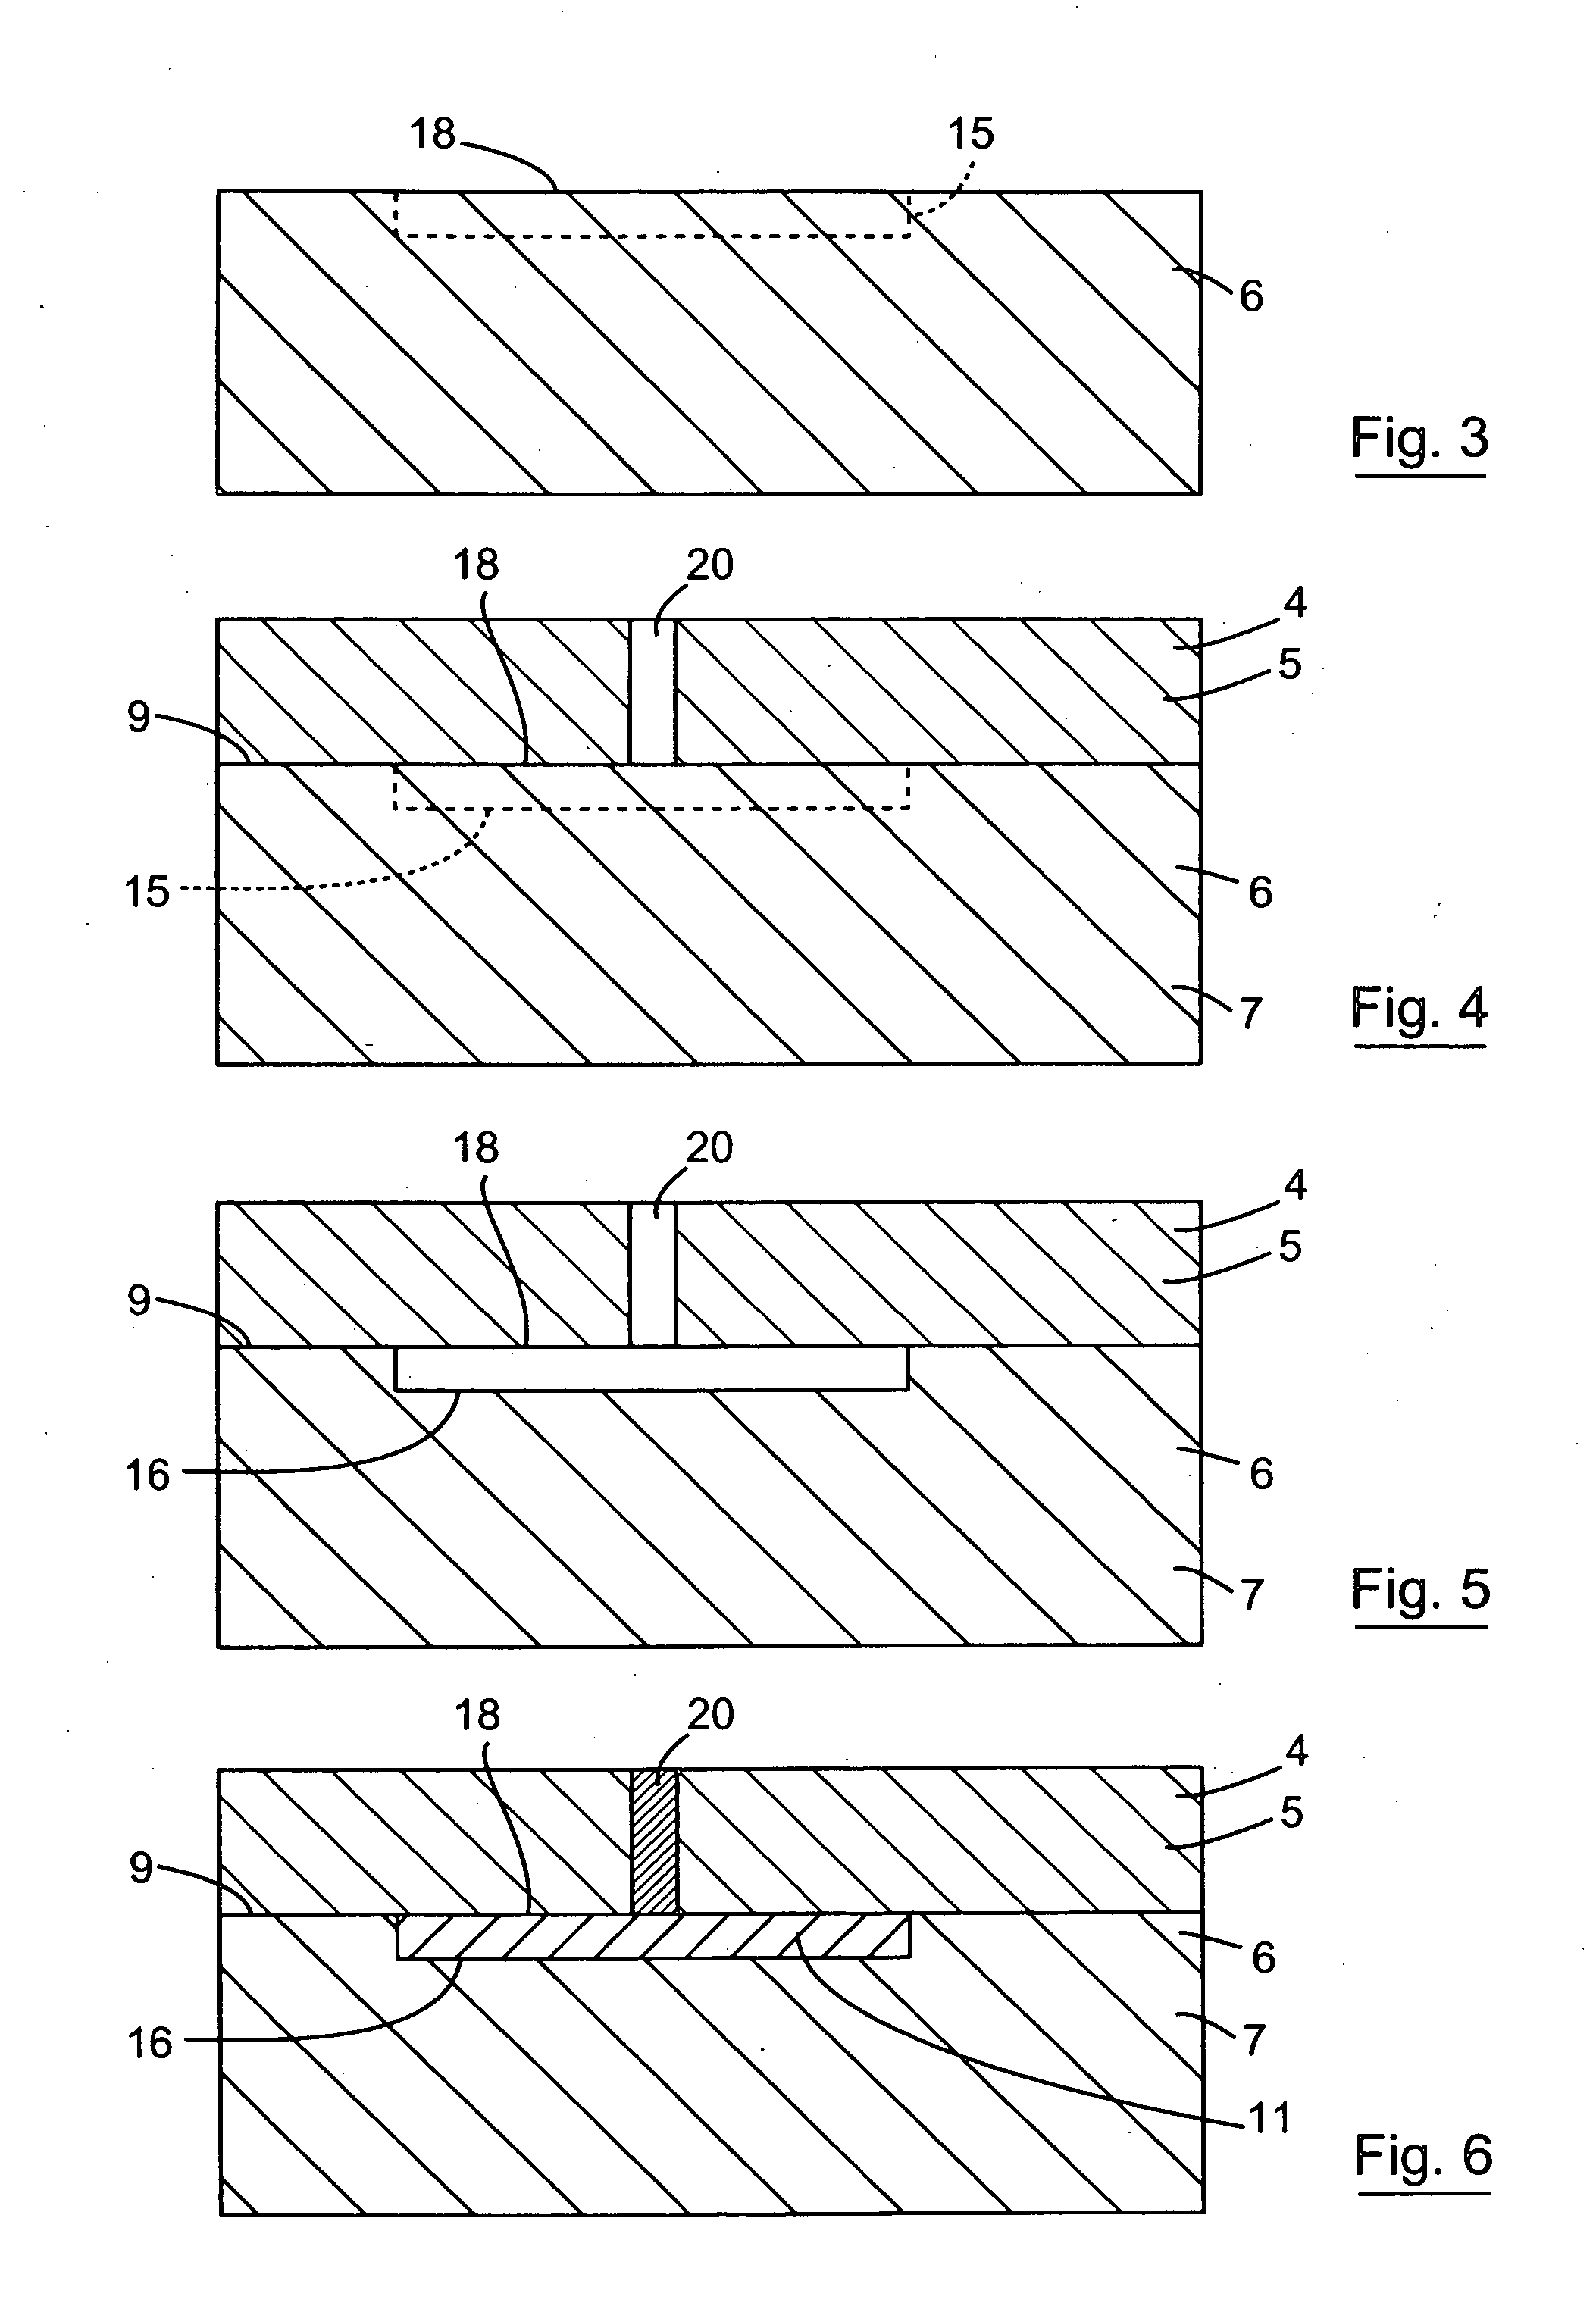 Method for forming a cavity and an SOI in a semiconductor substrate, and a semiconductor substrate having a buried cavity and/or an SOI formed therein